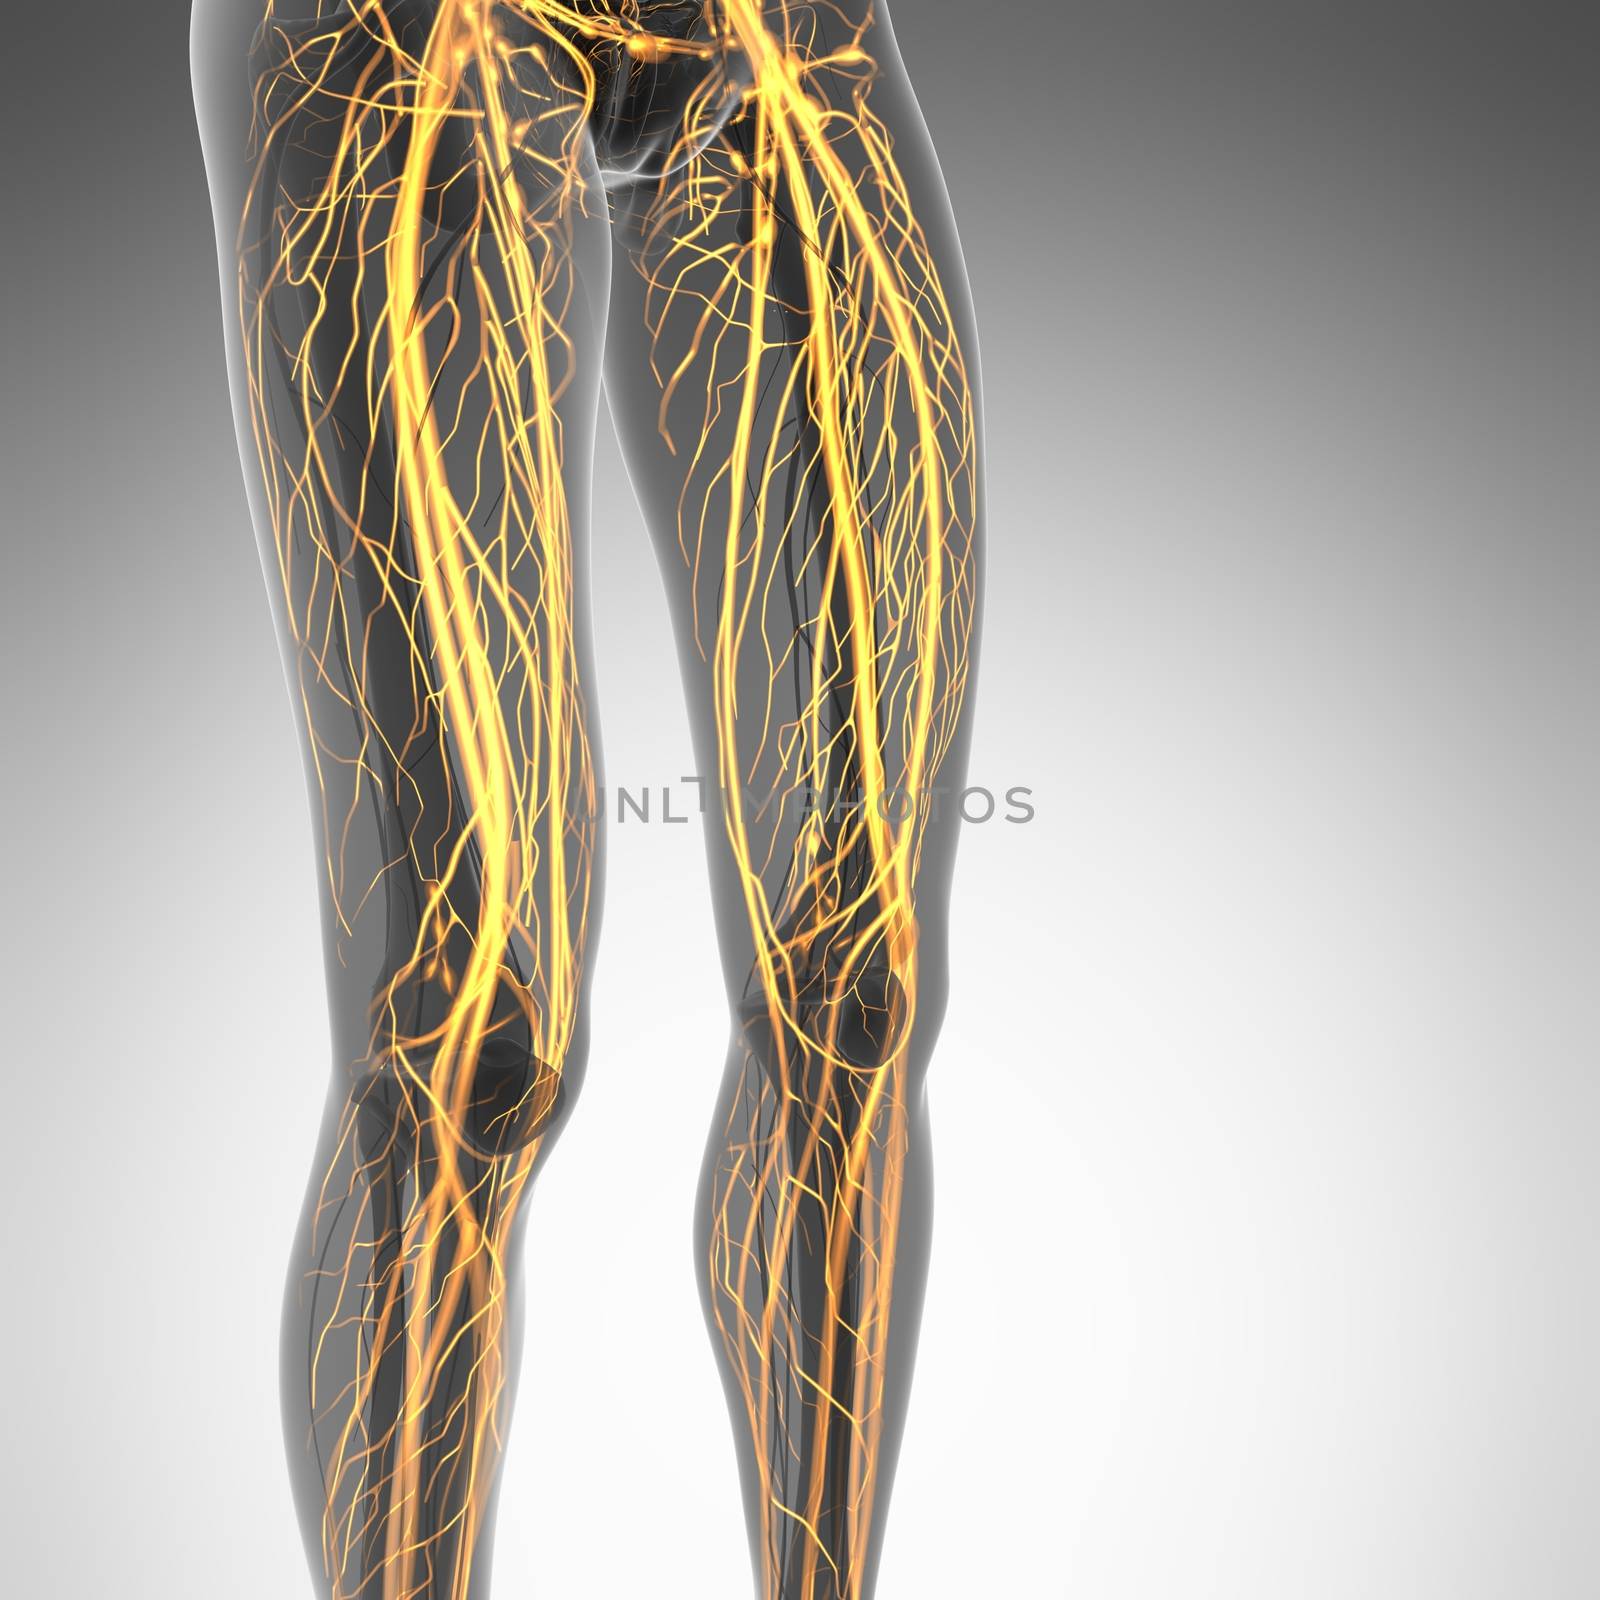 science anatomy of human body in x-ray with glow blood vessels by icetray